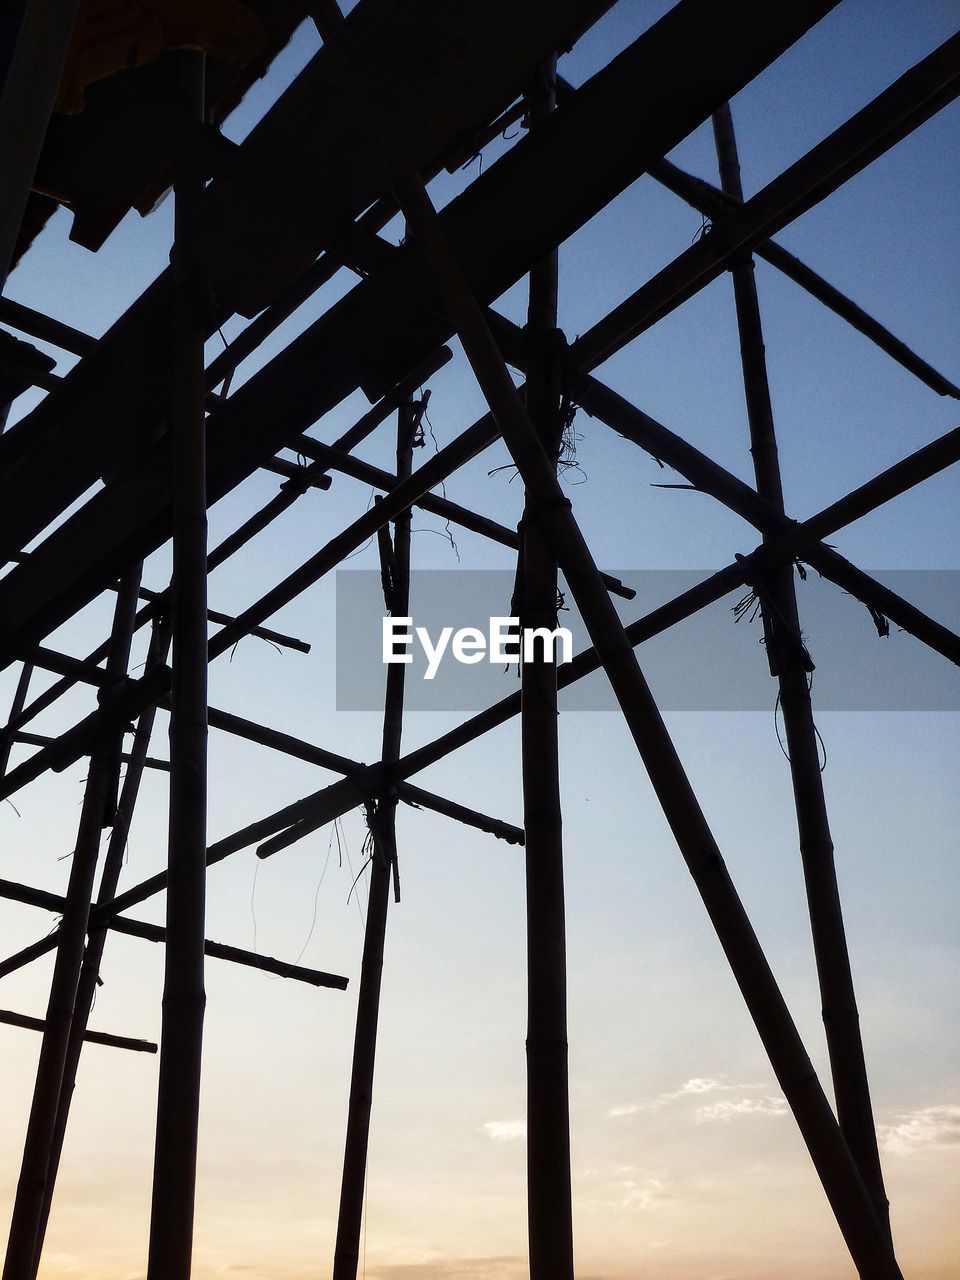 sky, architecture, silhouette, sunset, built structure, nature, no people, line, power generation, cloud, technology, industry, outdoors, electricity, low angle view, metal, environment, blue, sunlight, girder, electricity pylon, power supply, alloy, business finance and industry, dusk